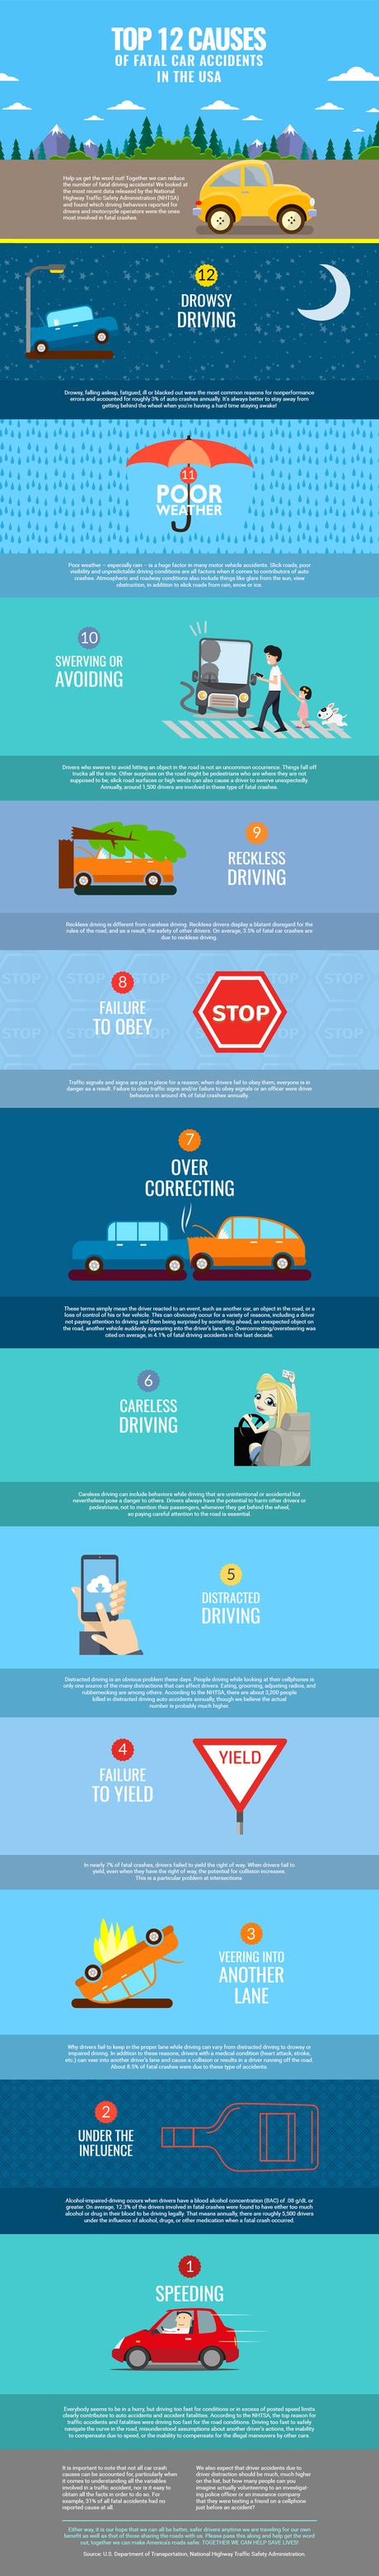 12 Top Causes of Car Accidents in the USA